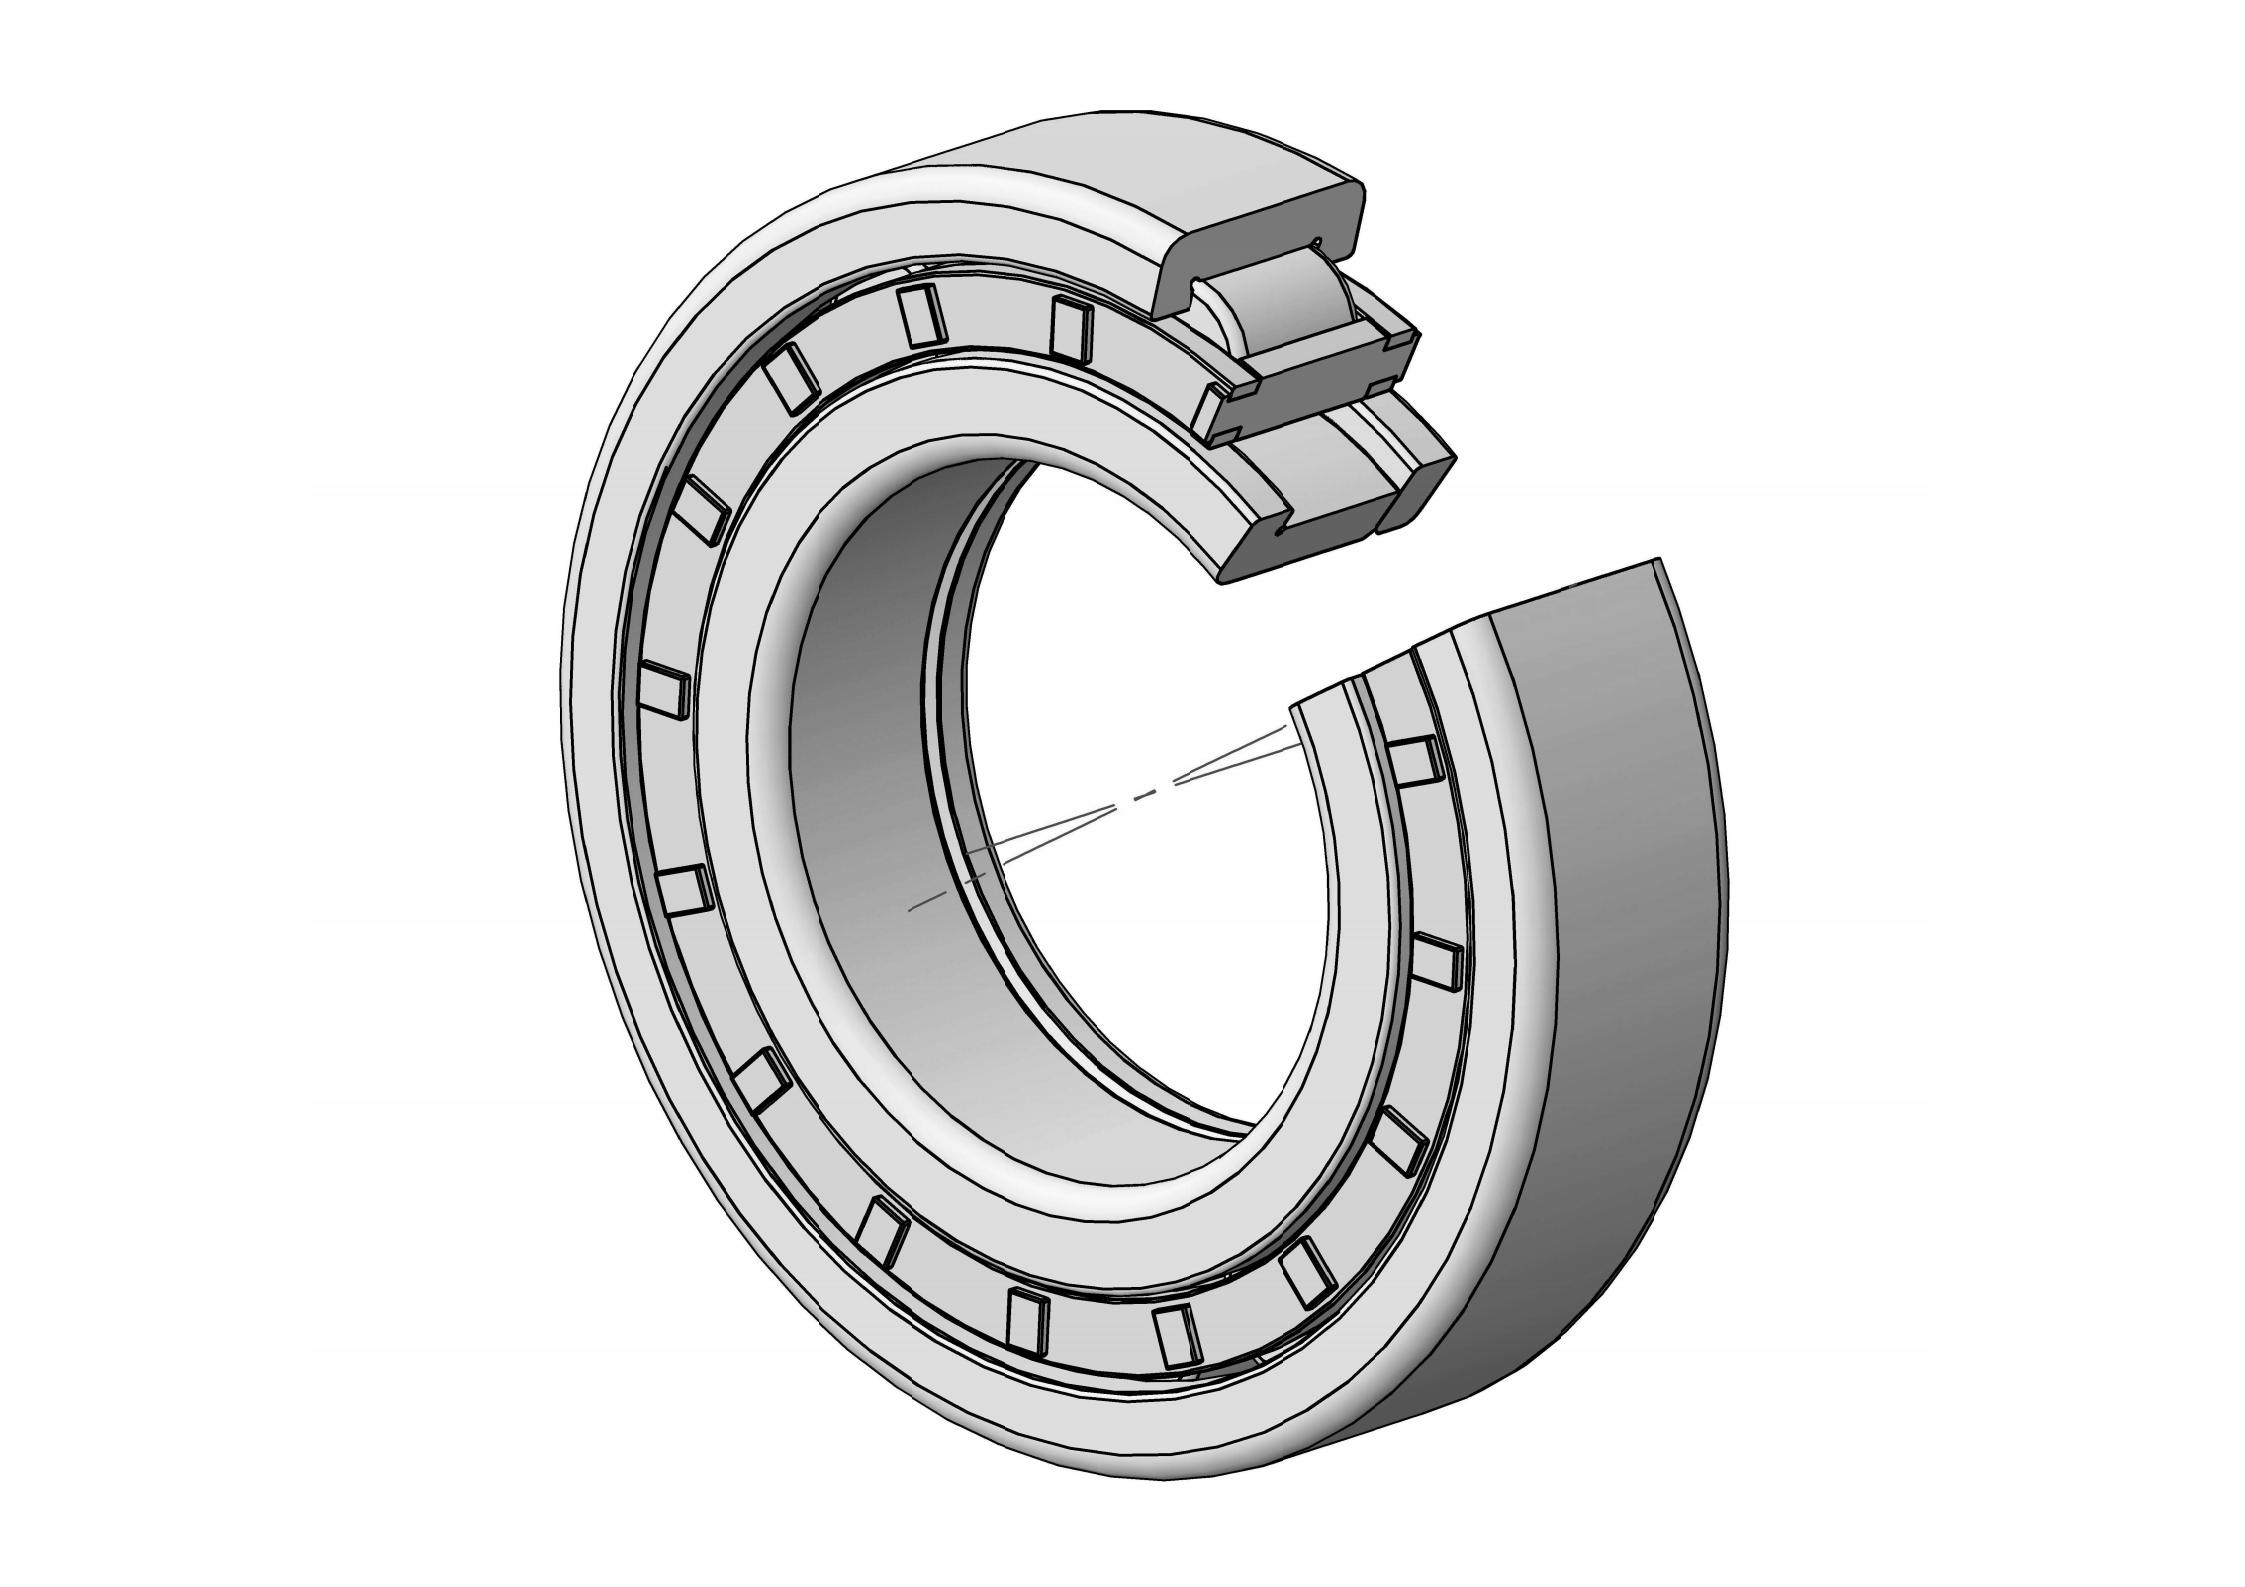 NUP244-EM Single Row Cylindrical roller bearing